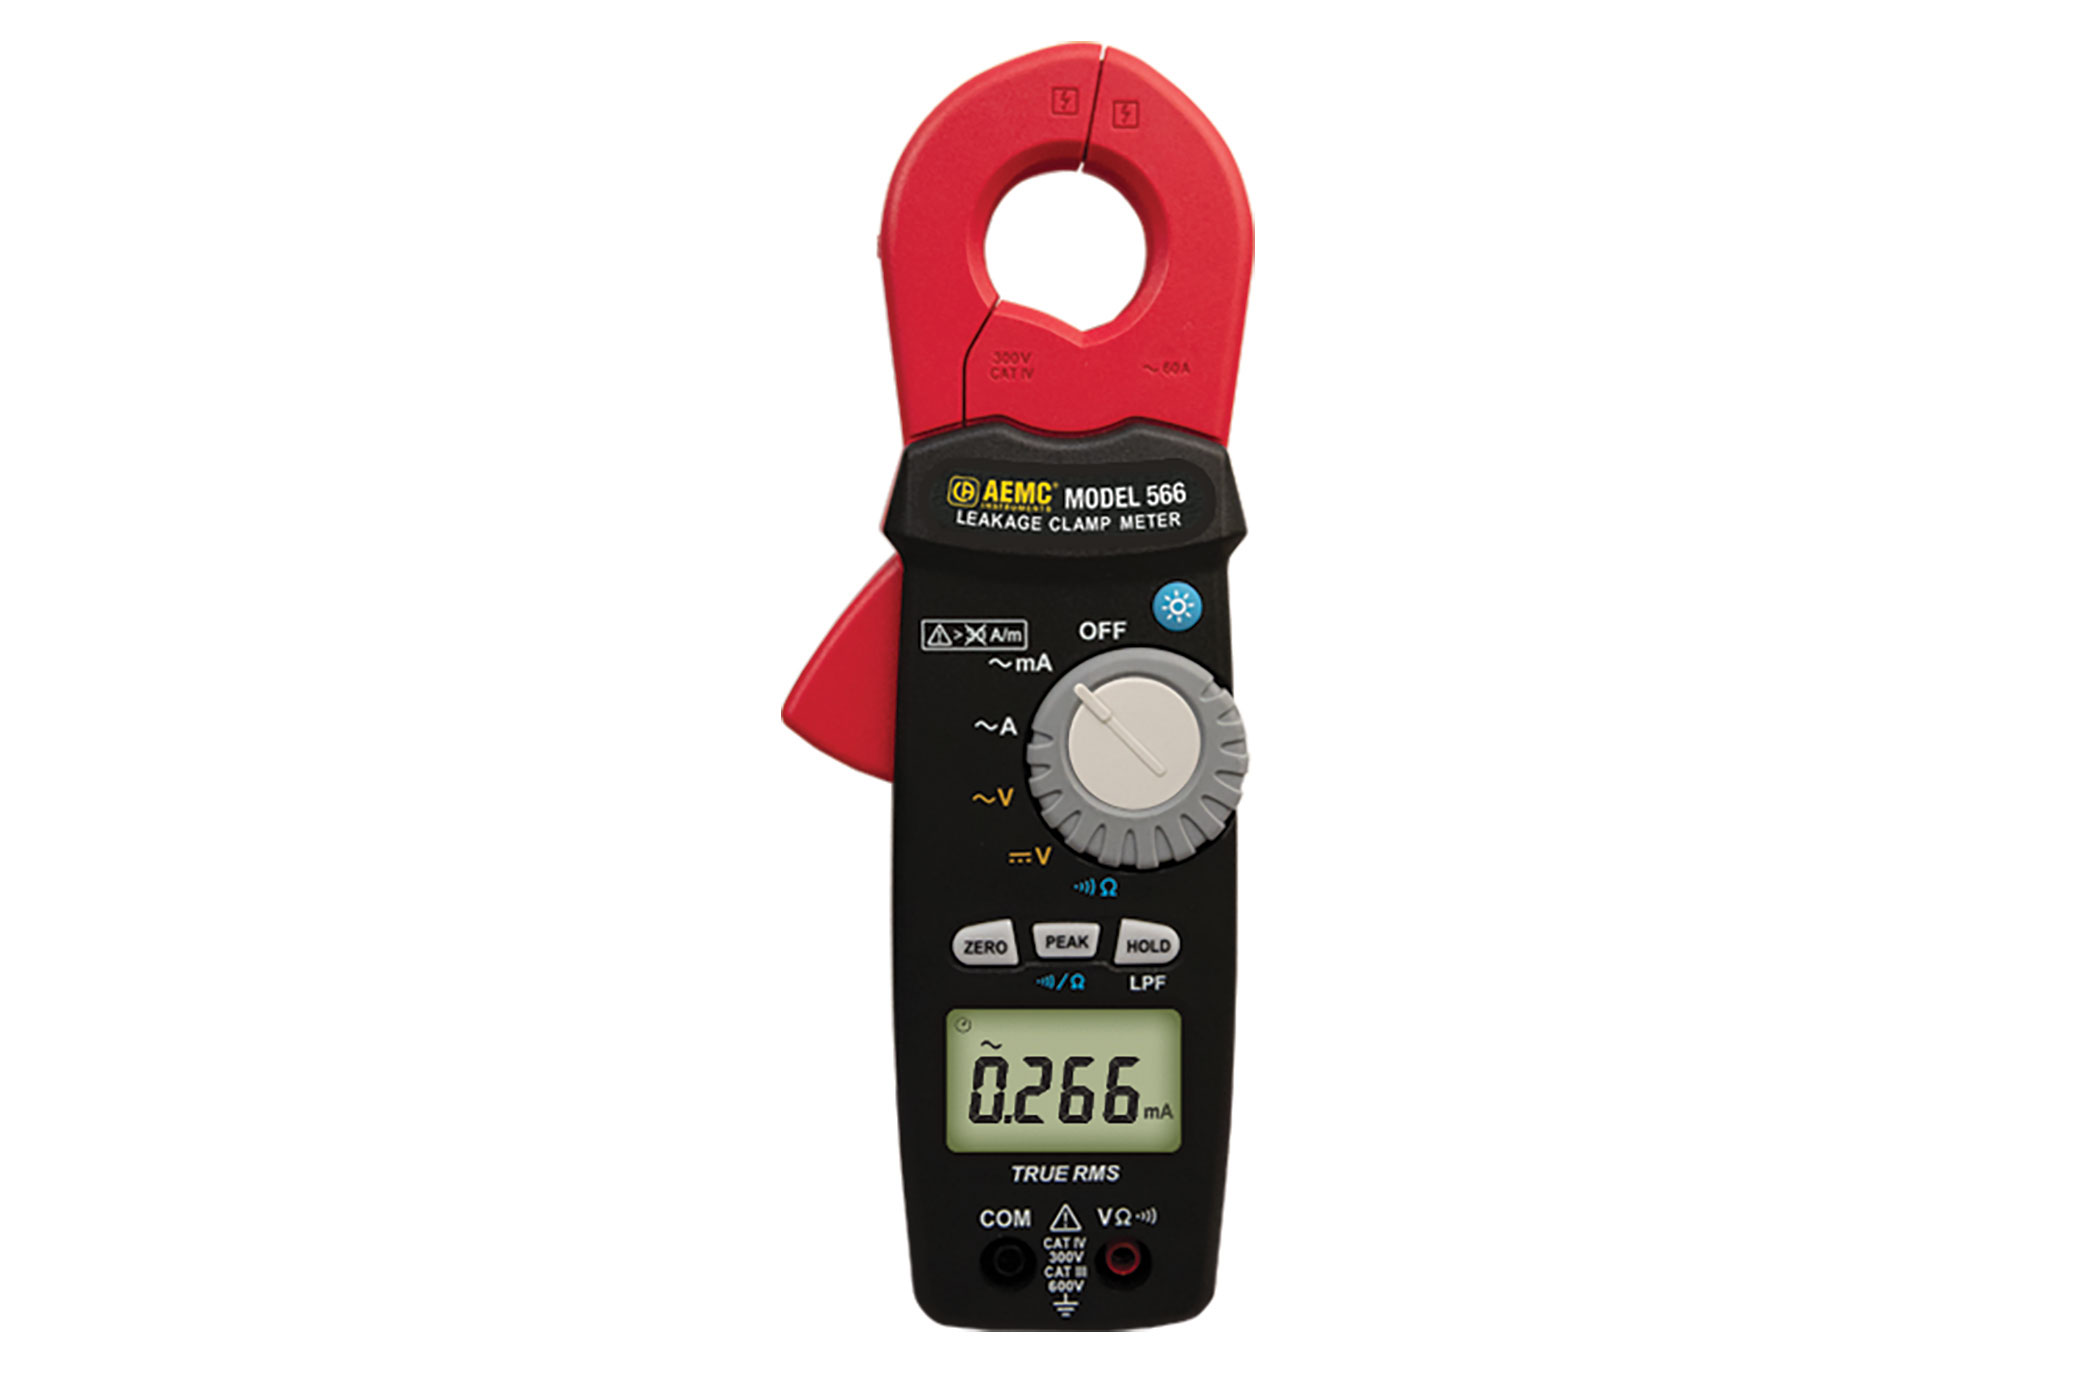 Black and red clamp meter. Image by AEMC.